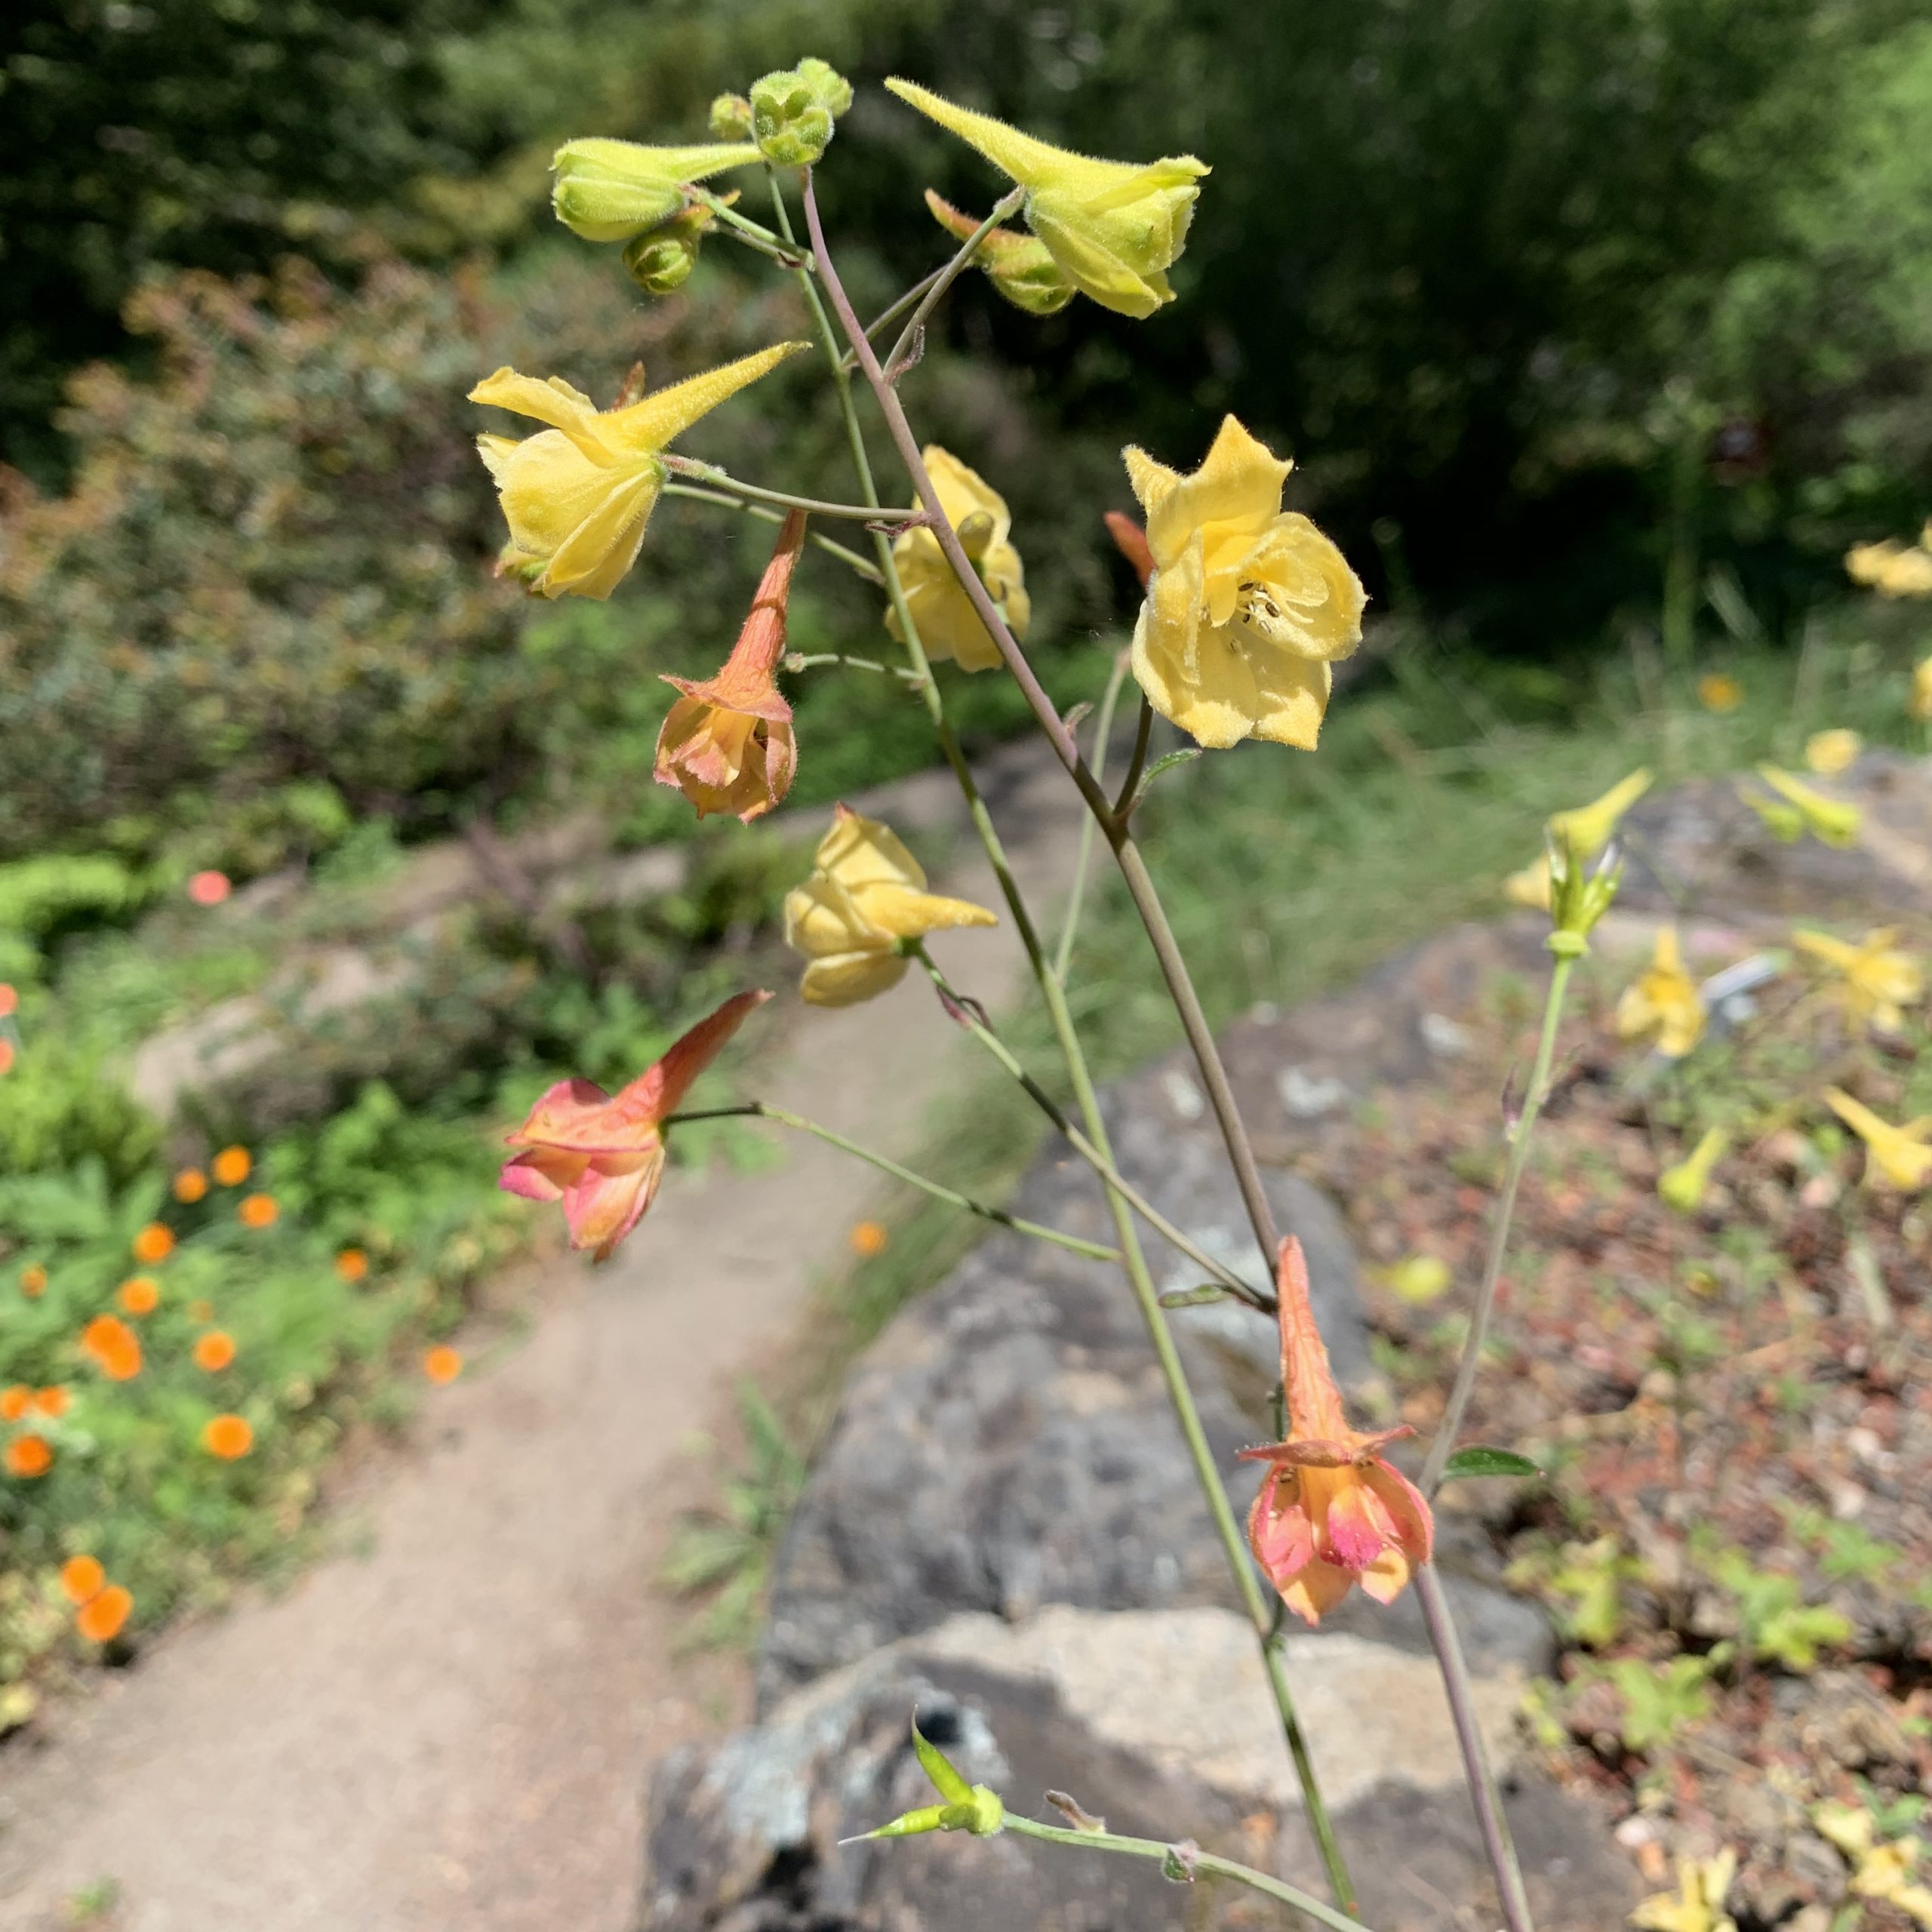 Yellow larkspur (Delphinium luteum) is an endangered geophyte thriving at RPBG. For decades, it has hybridized with the red larkspur (D. nudicaule) as pictured here.Photo by Bart O'Brien, courtesy of Regional Parks Botanic Garden.